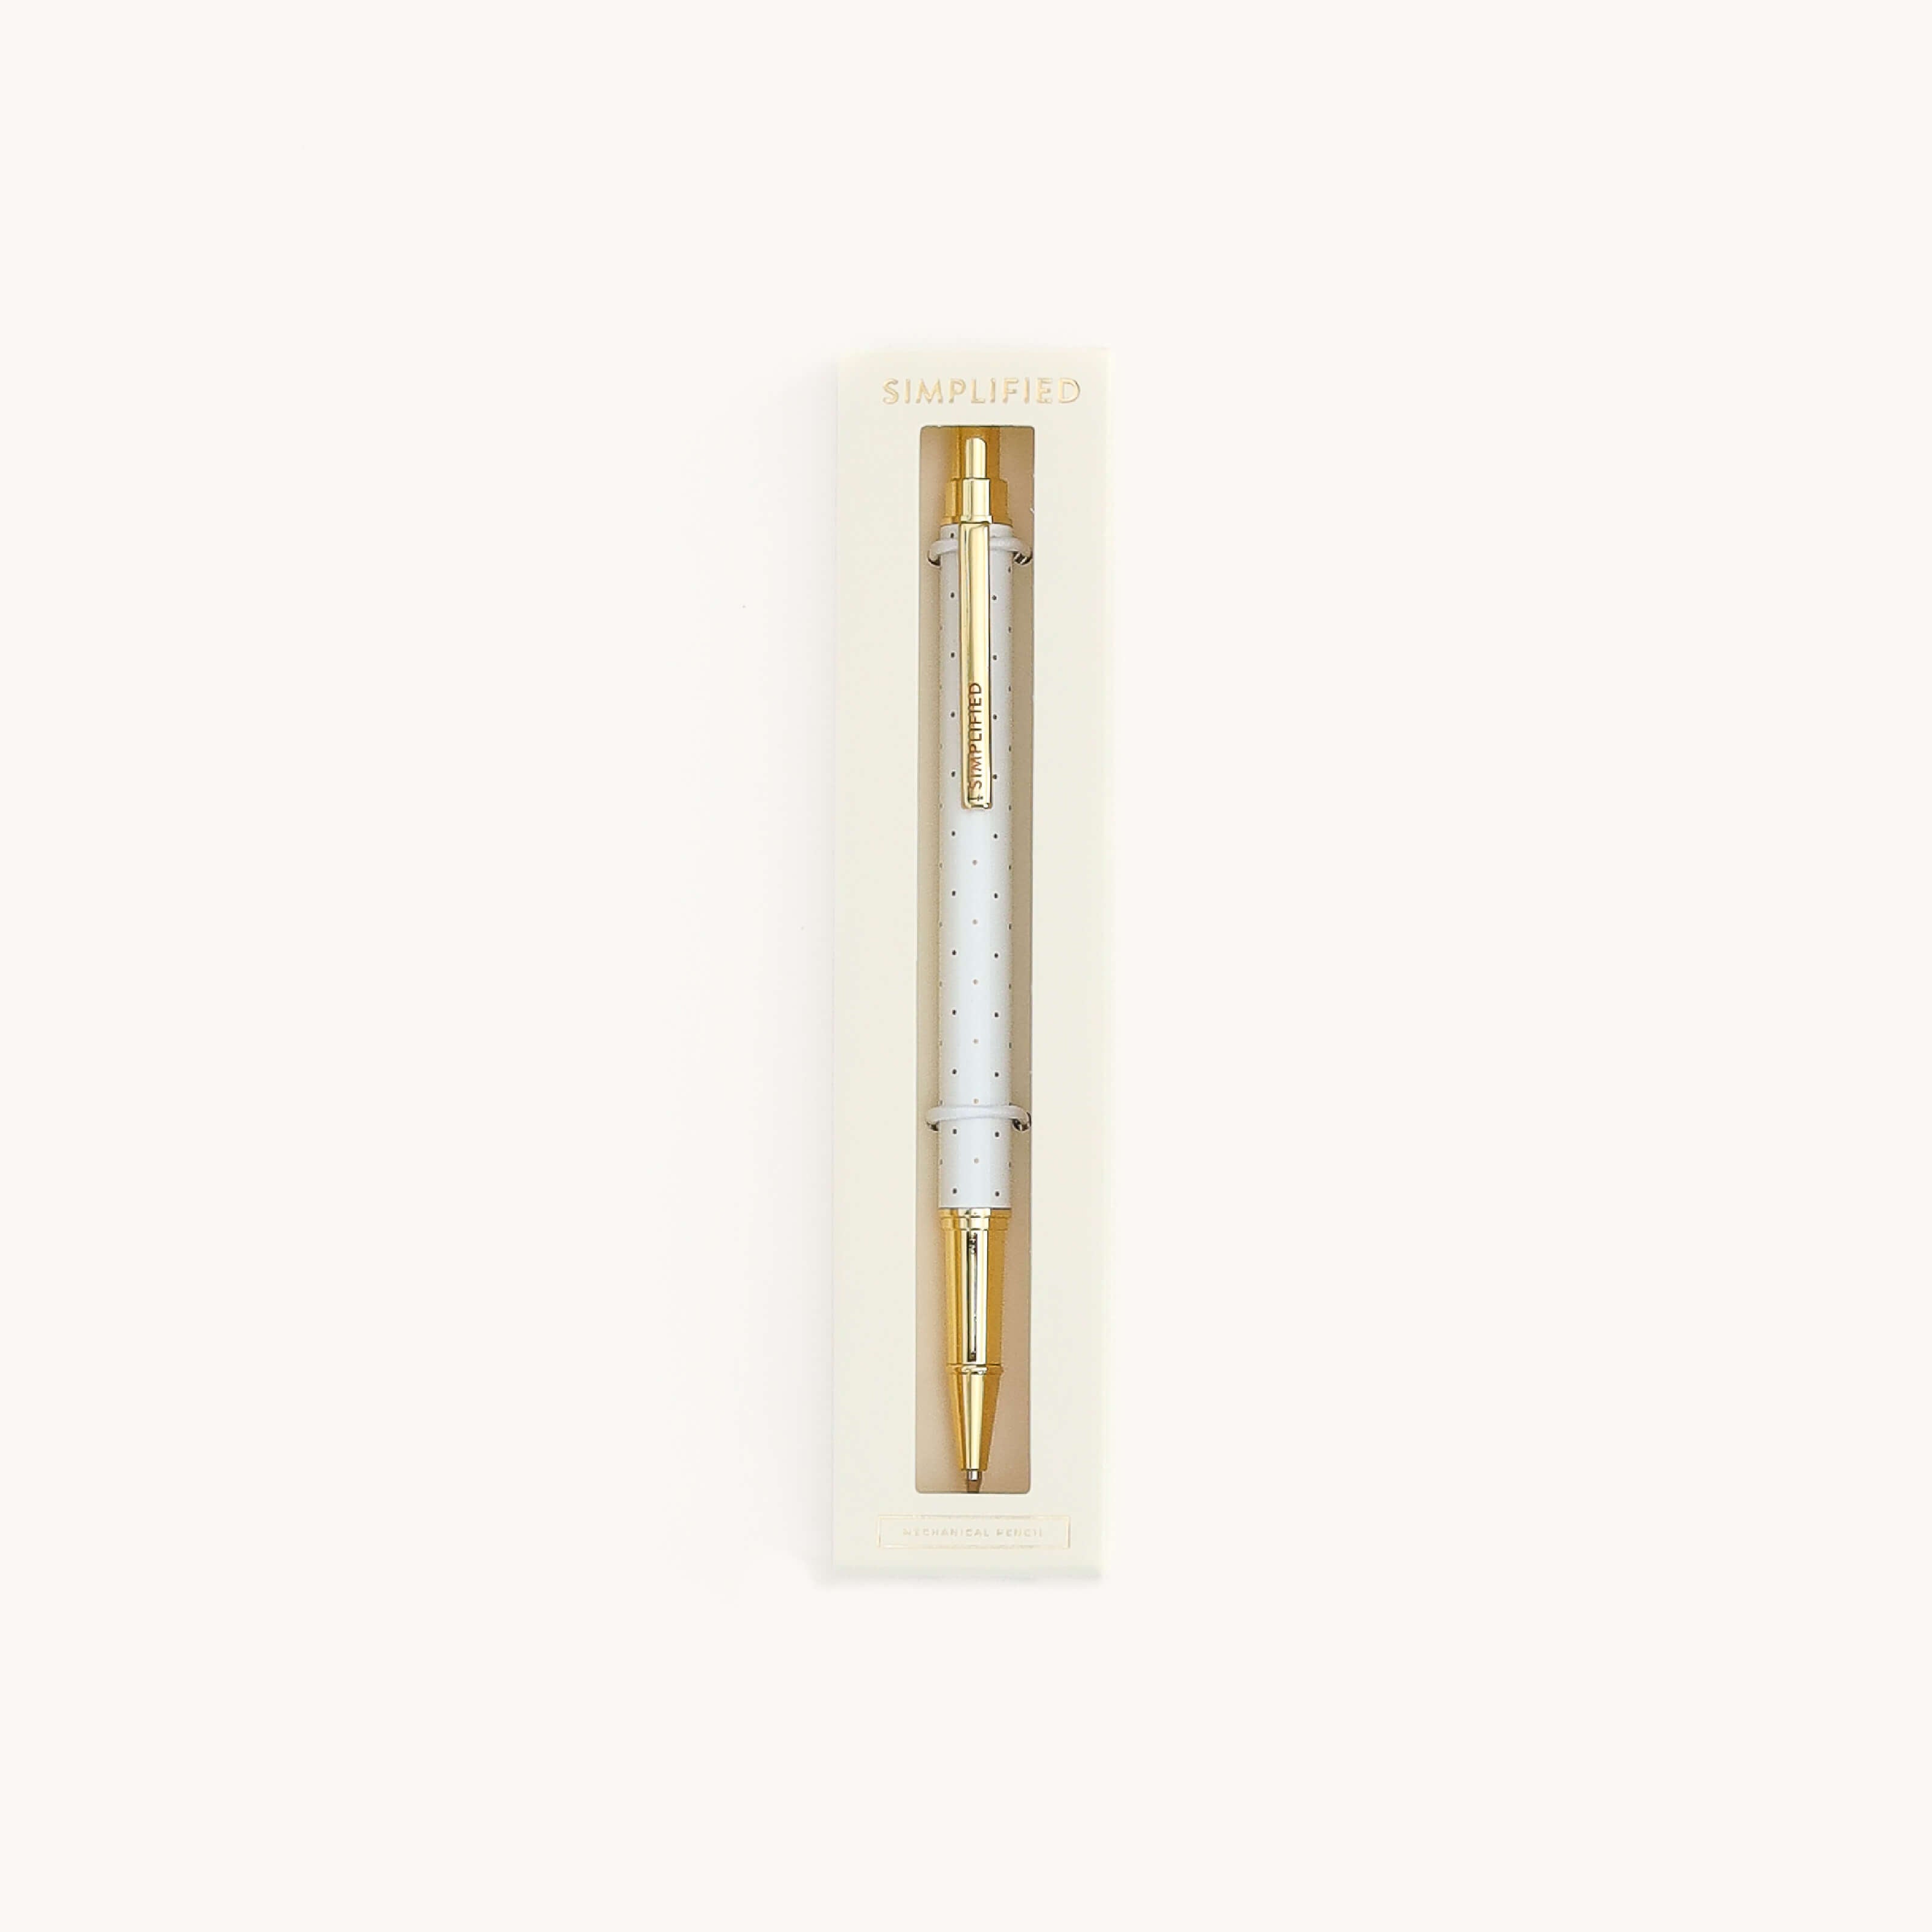 Mechanical Pencil, Gold Dot – Simplified® by Emily Ley